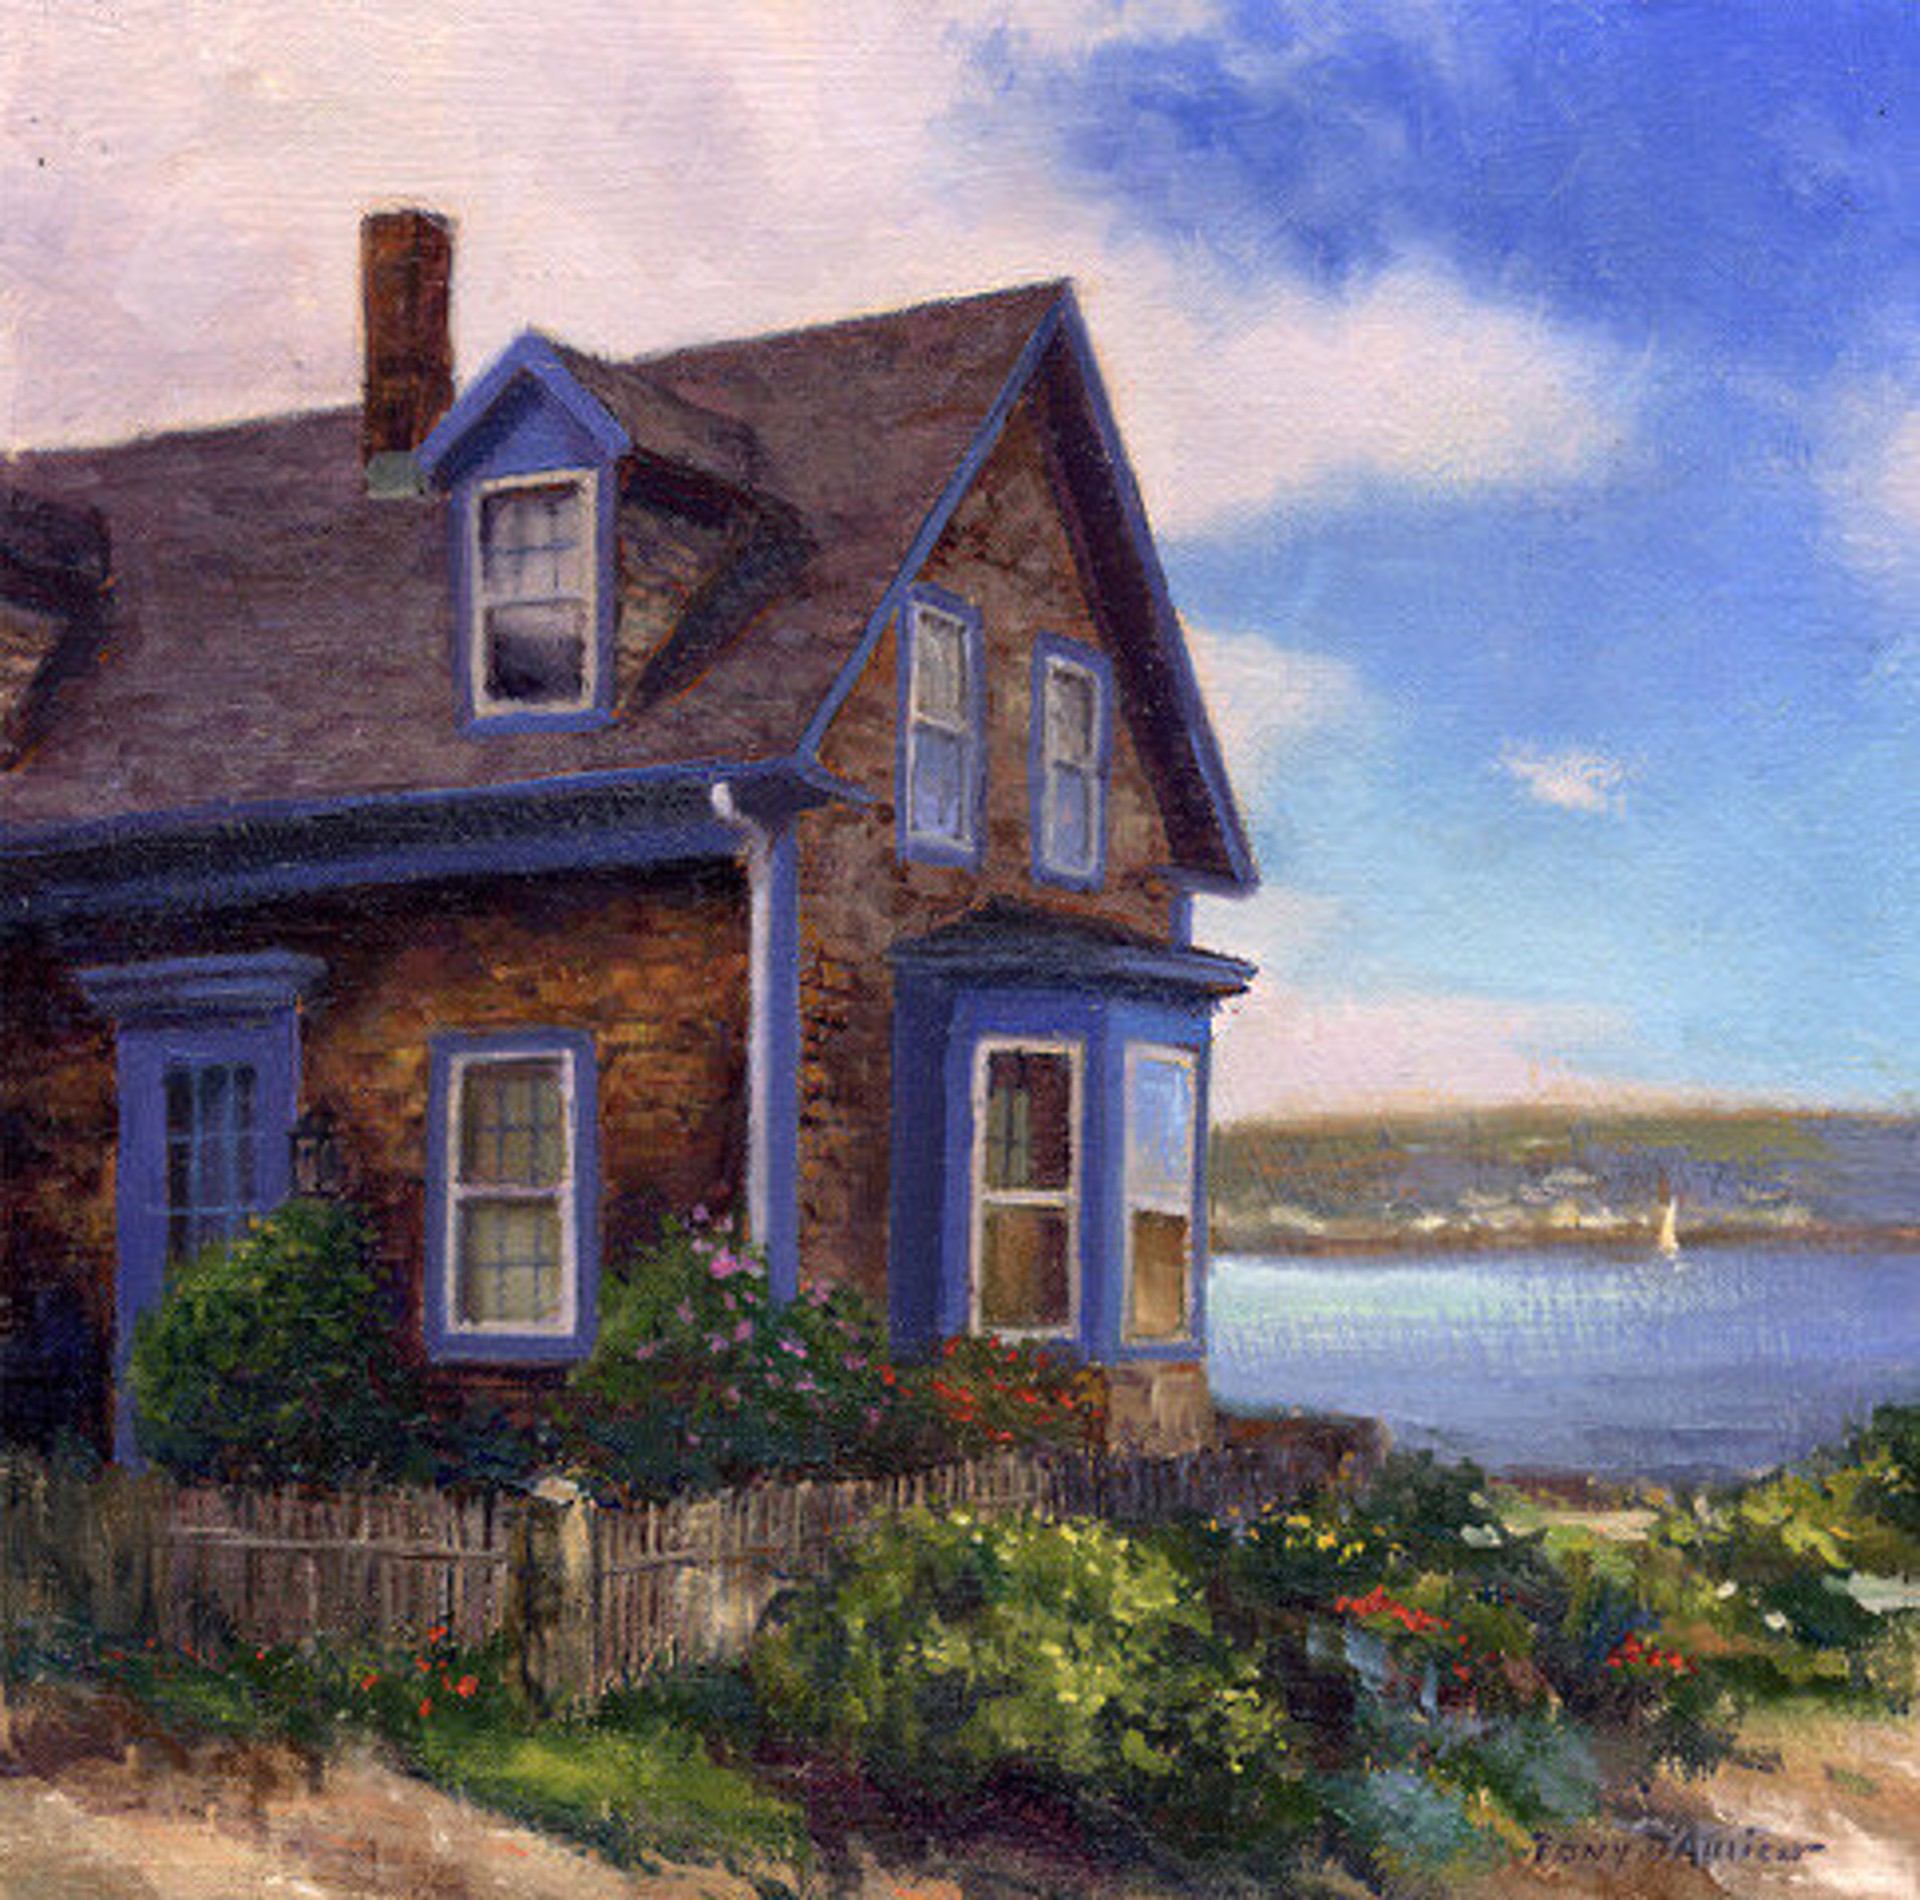 The Charm of Rockport by Tony D'Amico